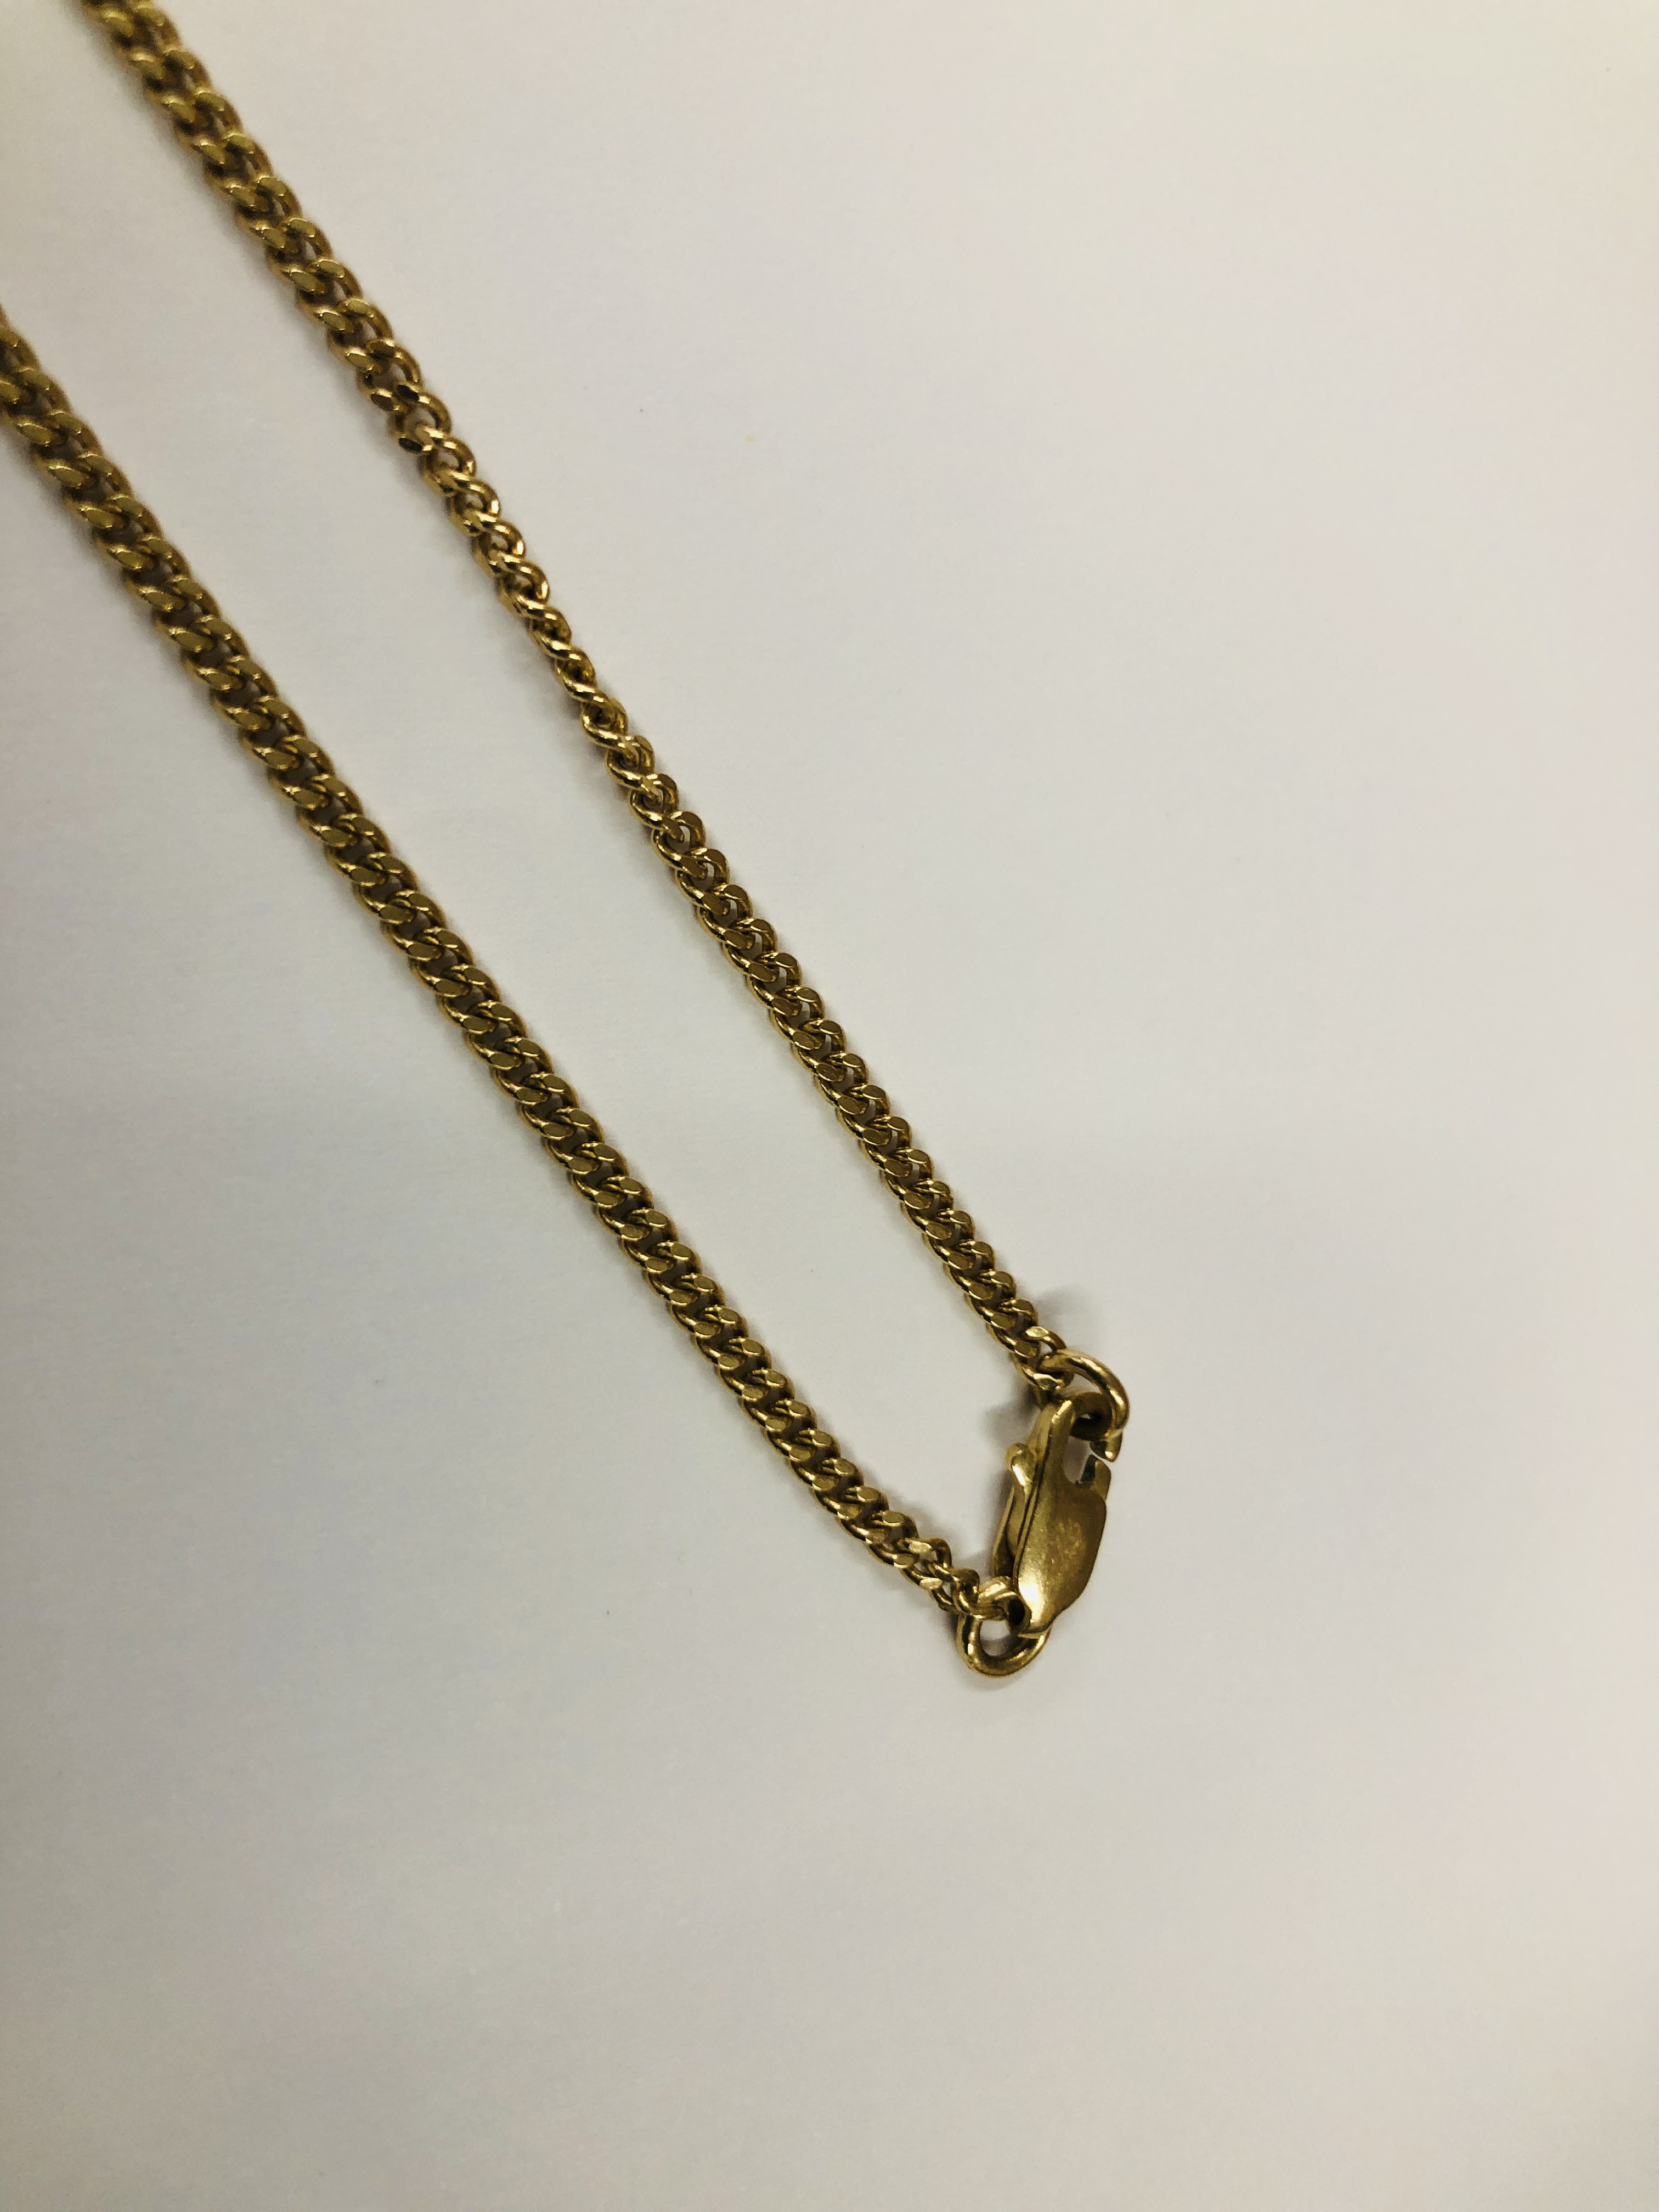 AN OVAL 9CT PHOTO LOCKET ON A FINE 9CT GOLD CHAIN - L 55CM. - Image 3 of 9